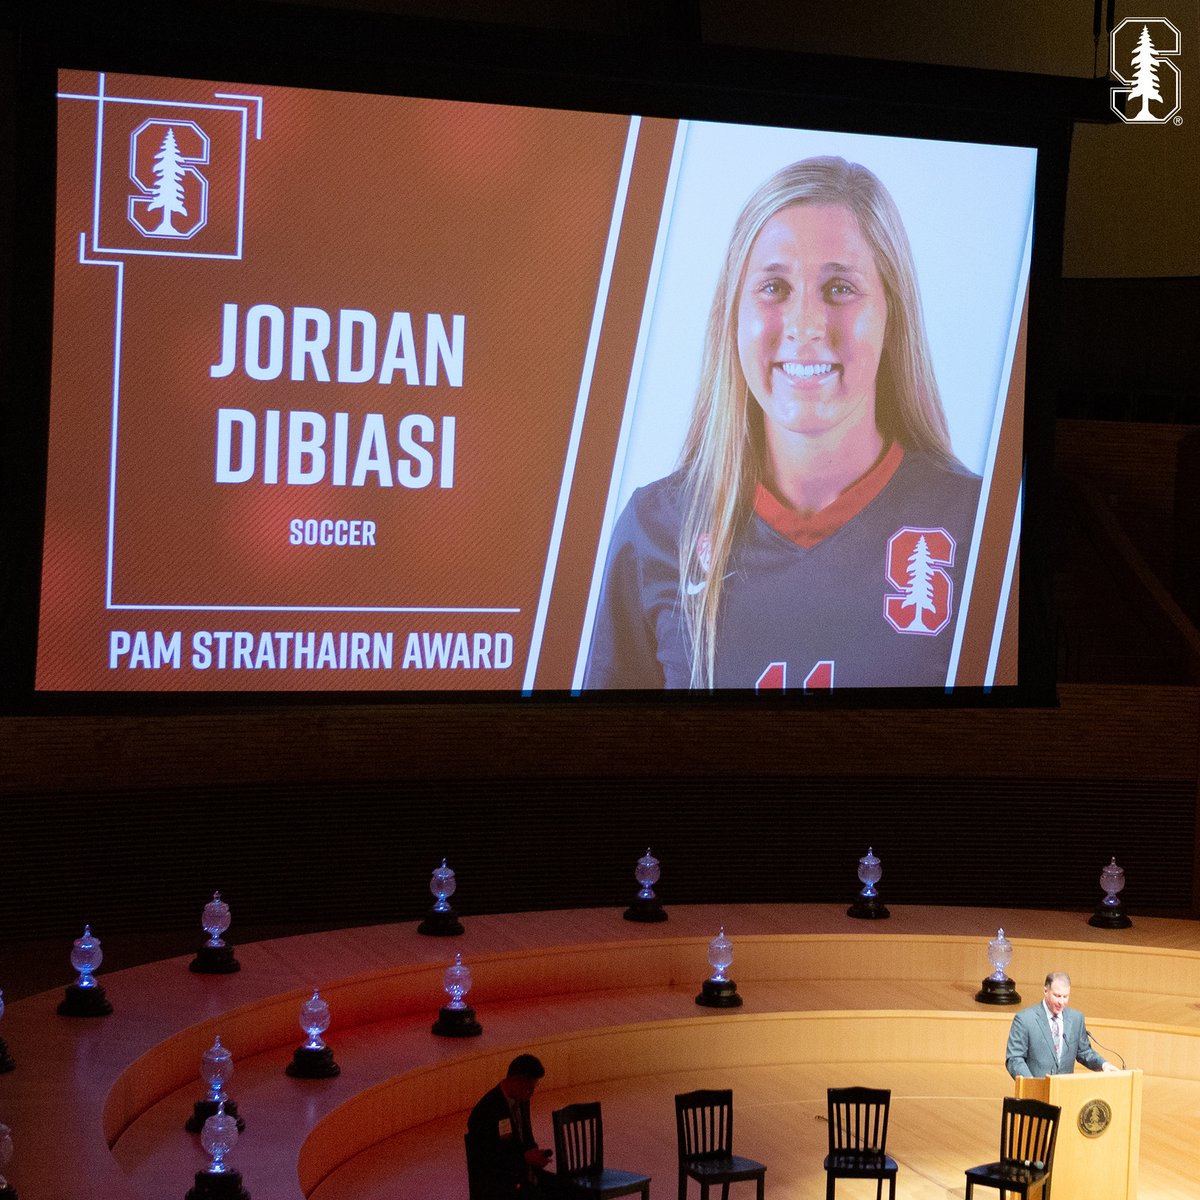 Jordan DiBiasi wins Stanford’s Pam Strathairn Award for competitive attitude Featured Image